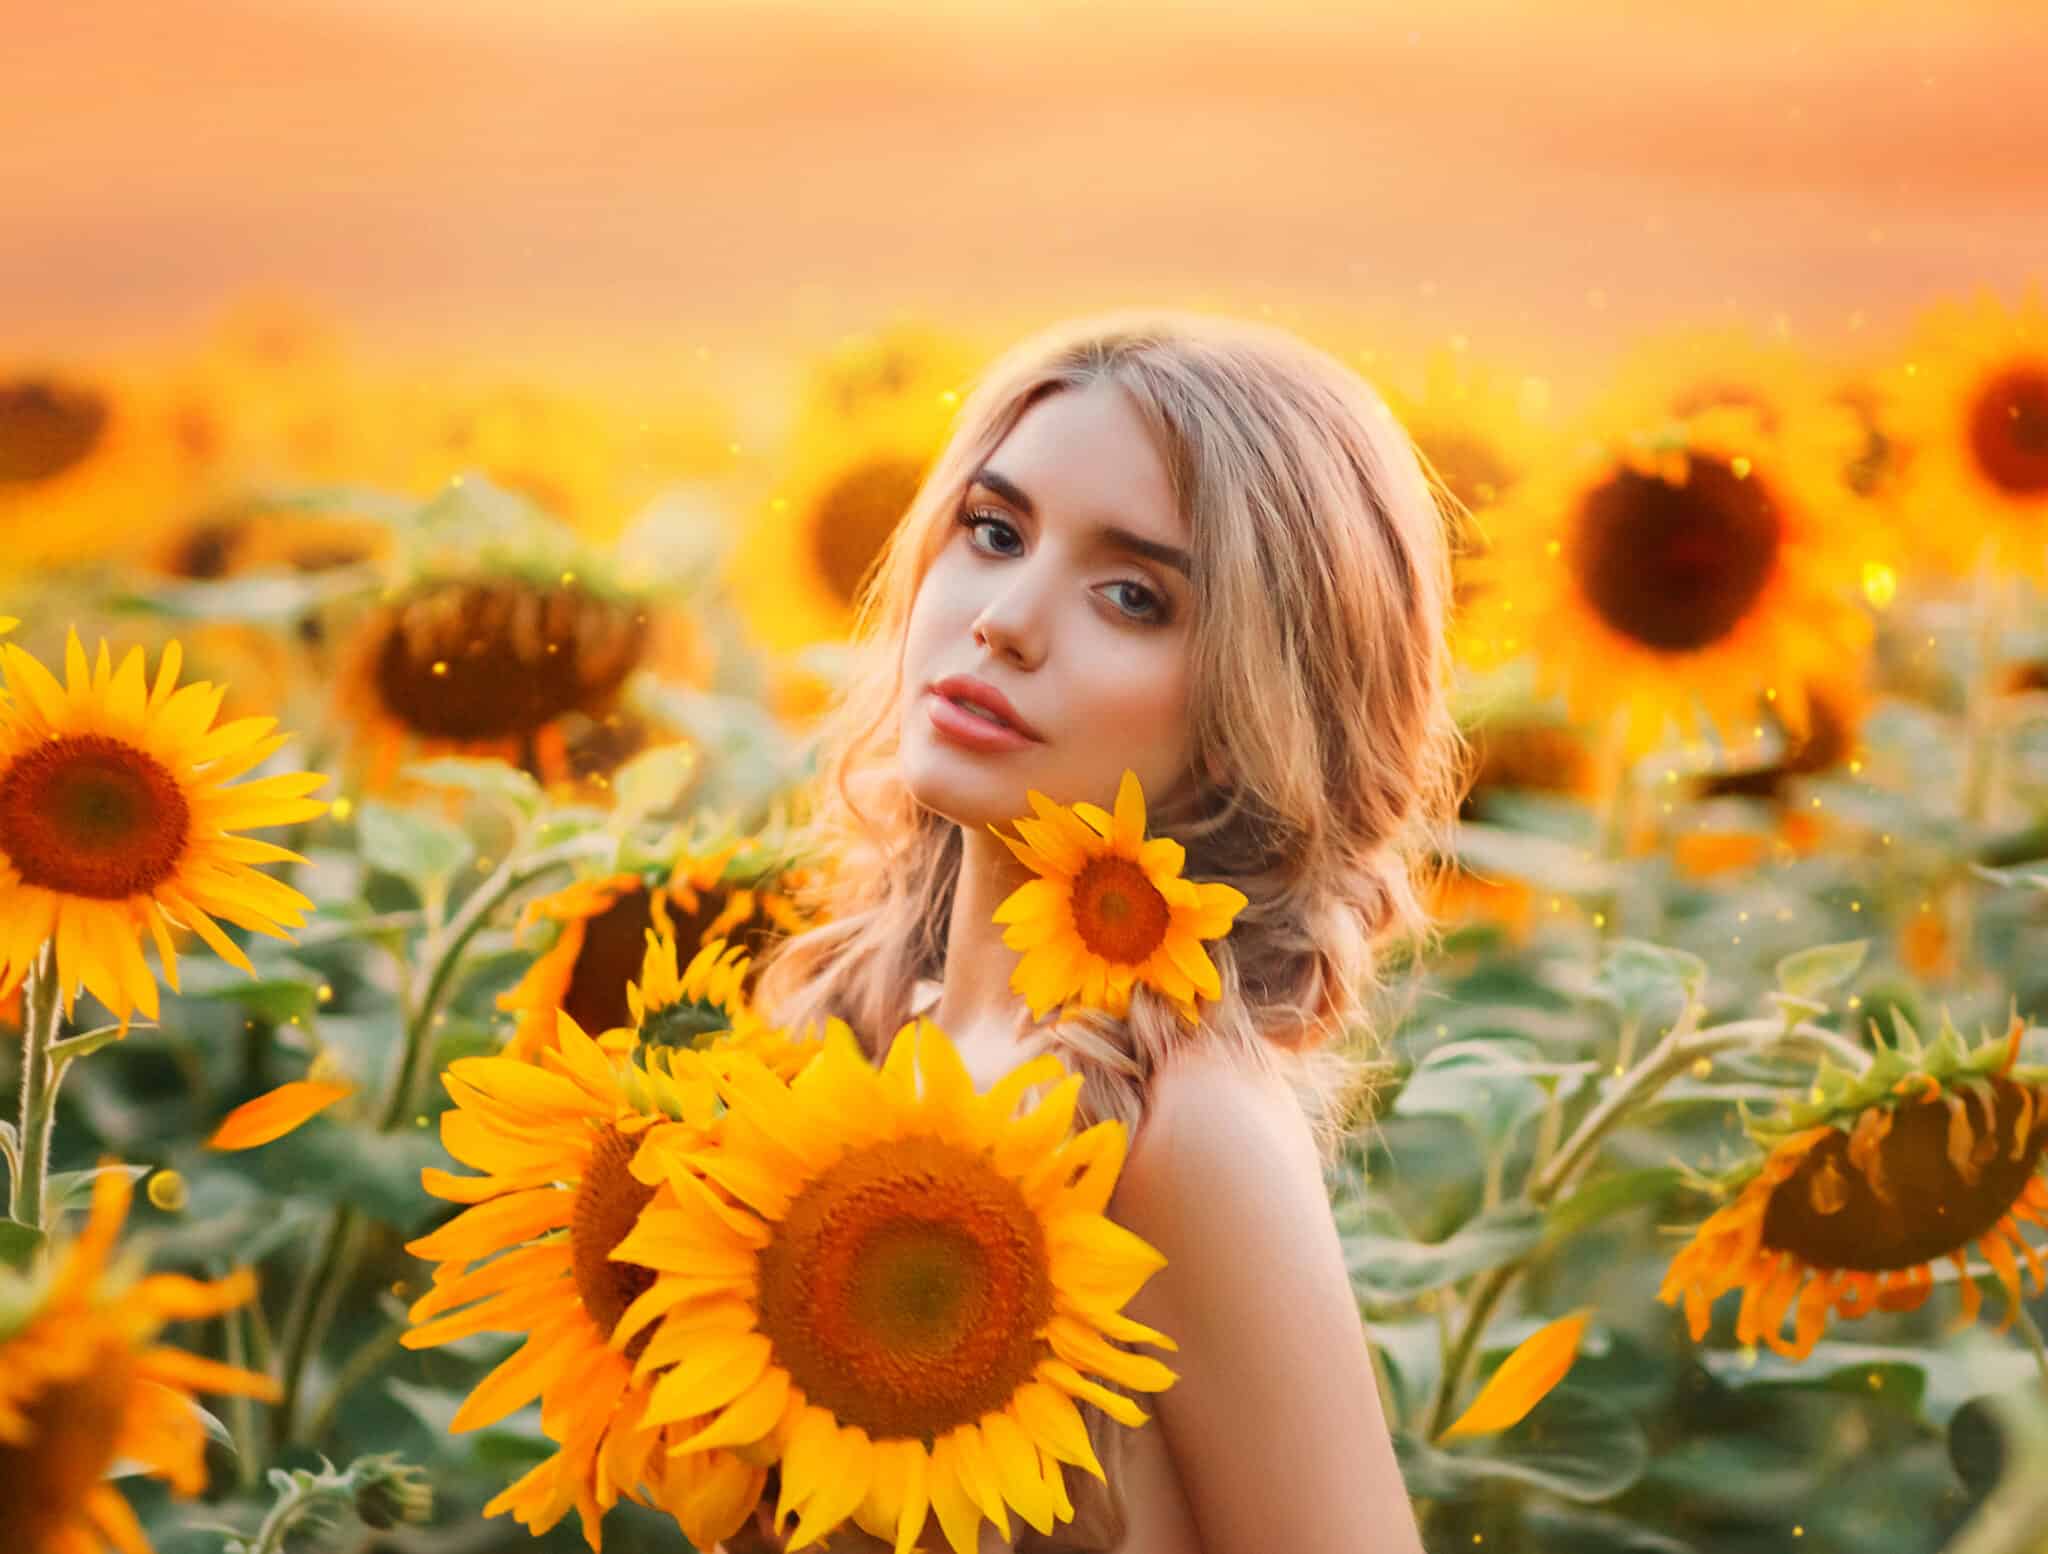 A young blonde woman stands in a field with blooming sunflowers and hugs a bouquet of flowers.